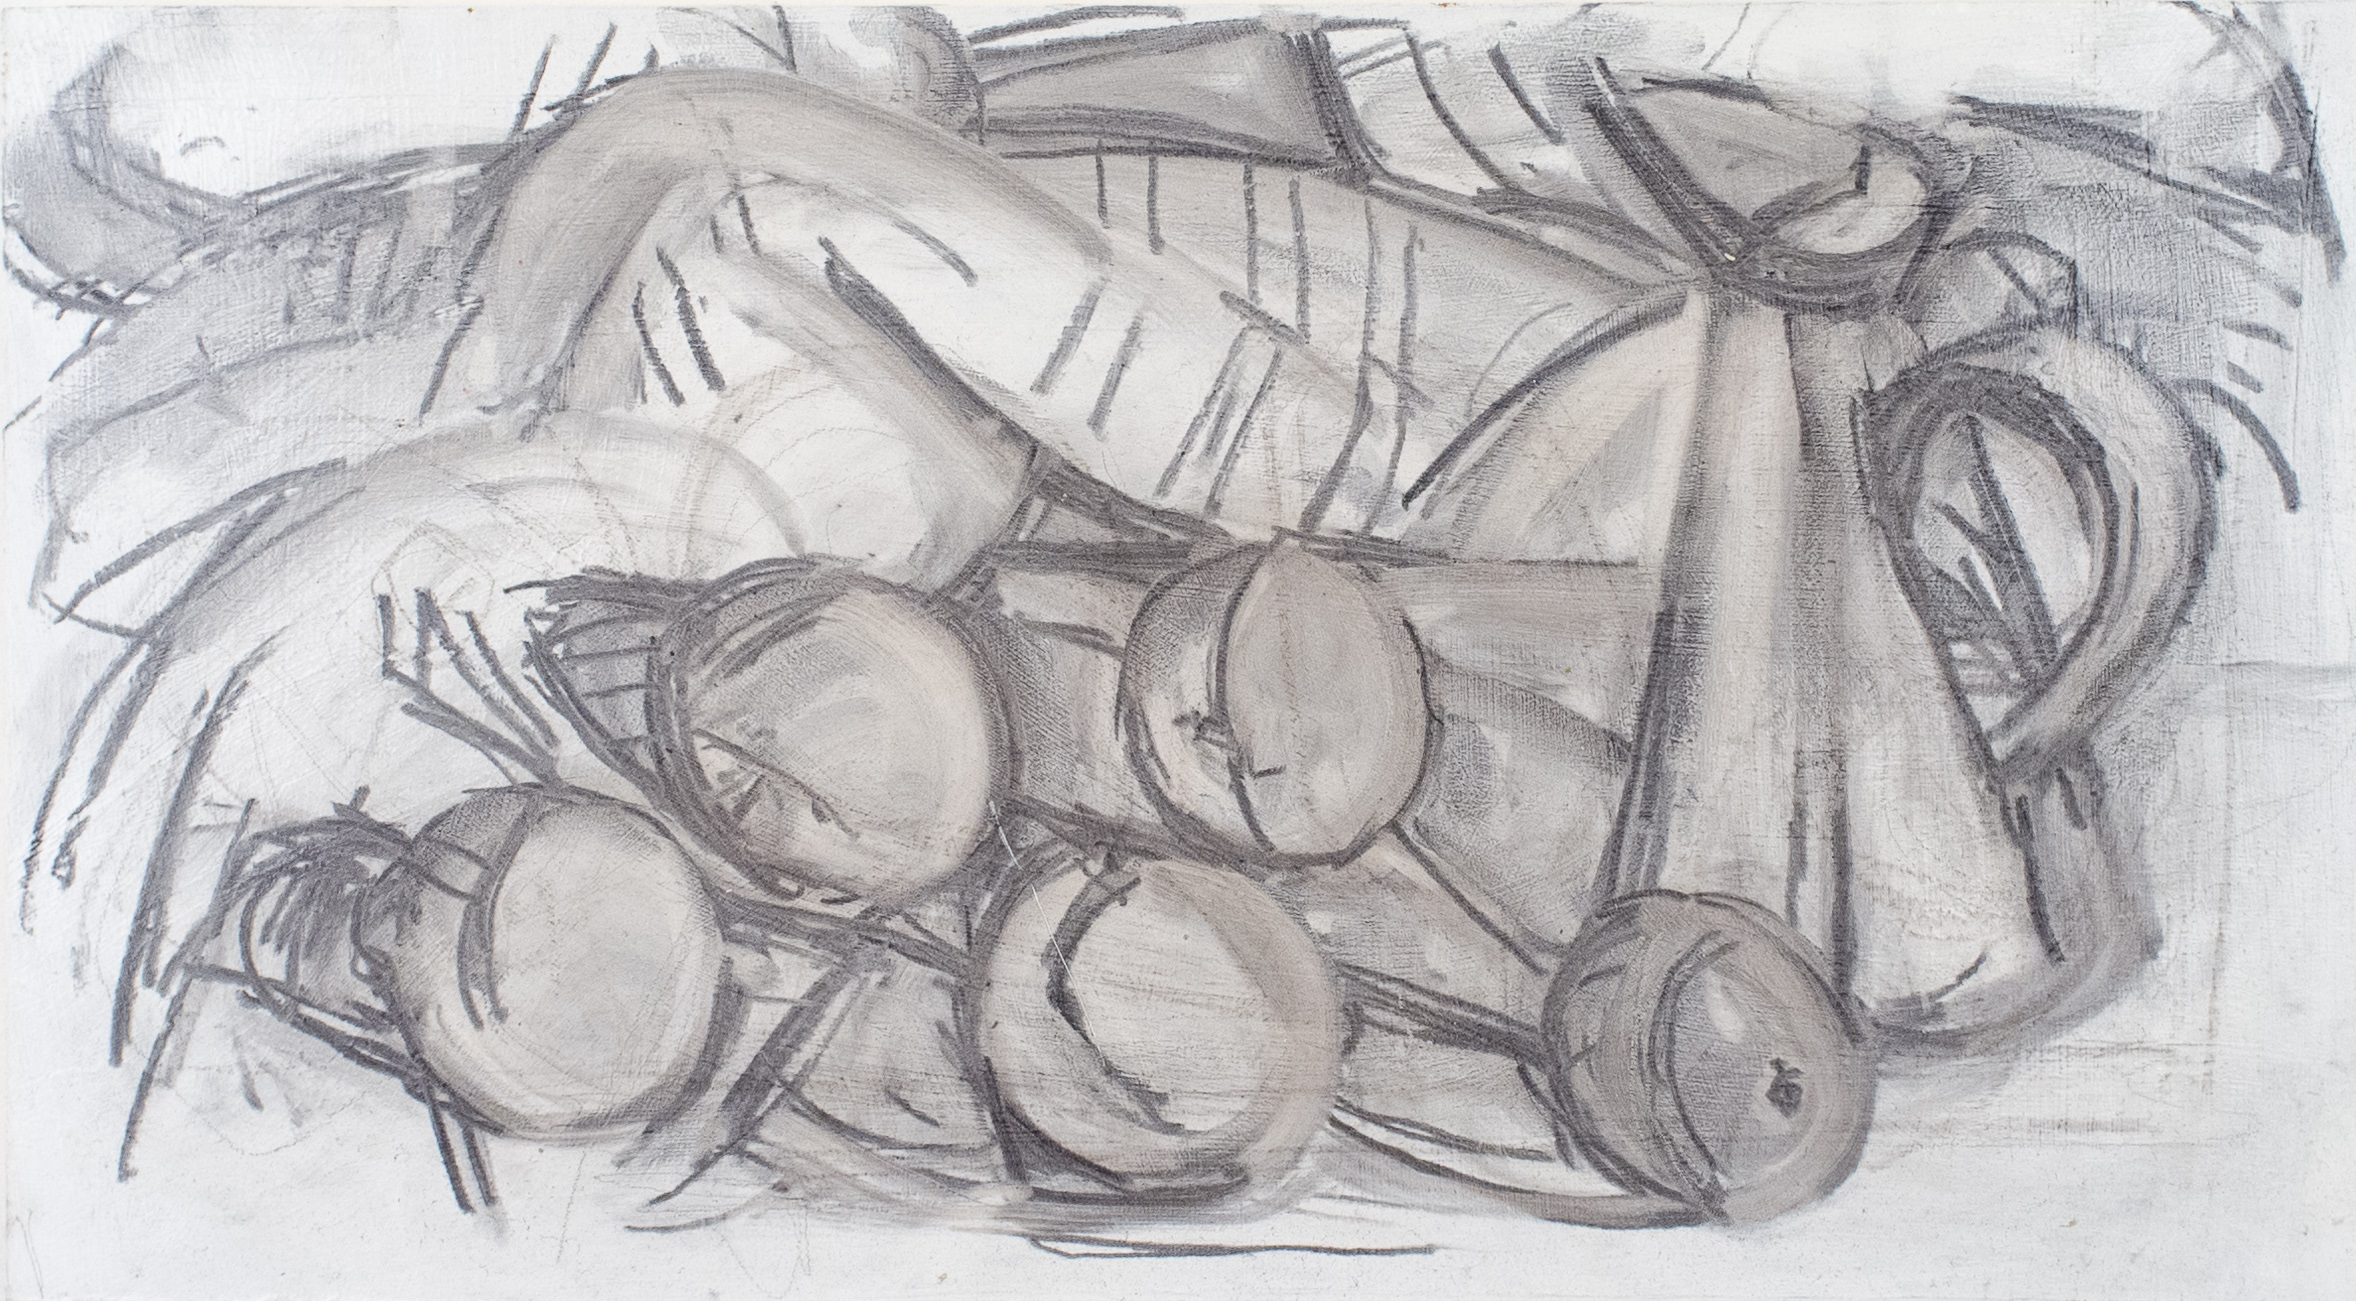   Lemons, Lime, Oil Can and Striped Cloth (study) , 2017, charcoal on panel, 10” x 18”  (Private collection)  